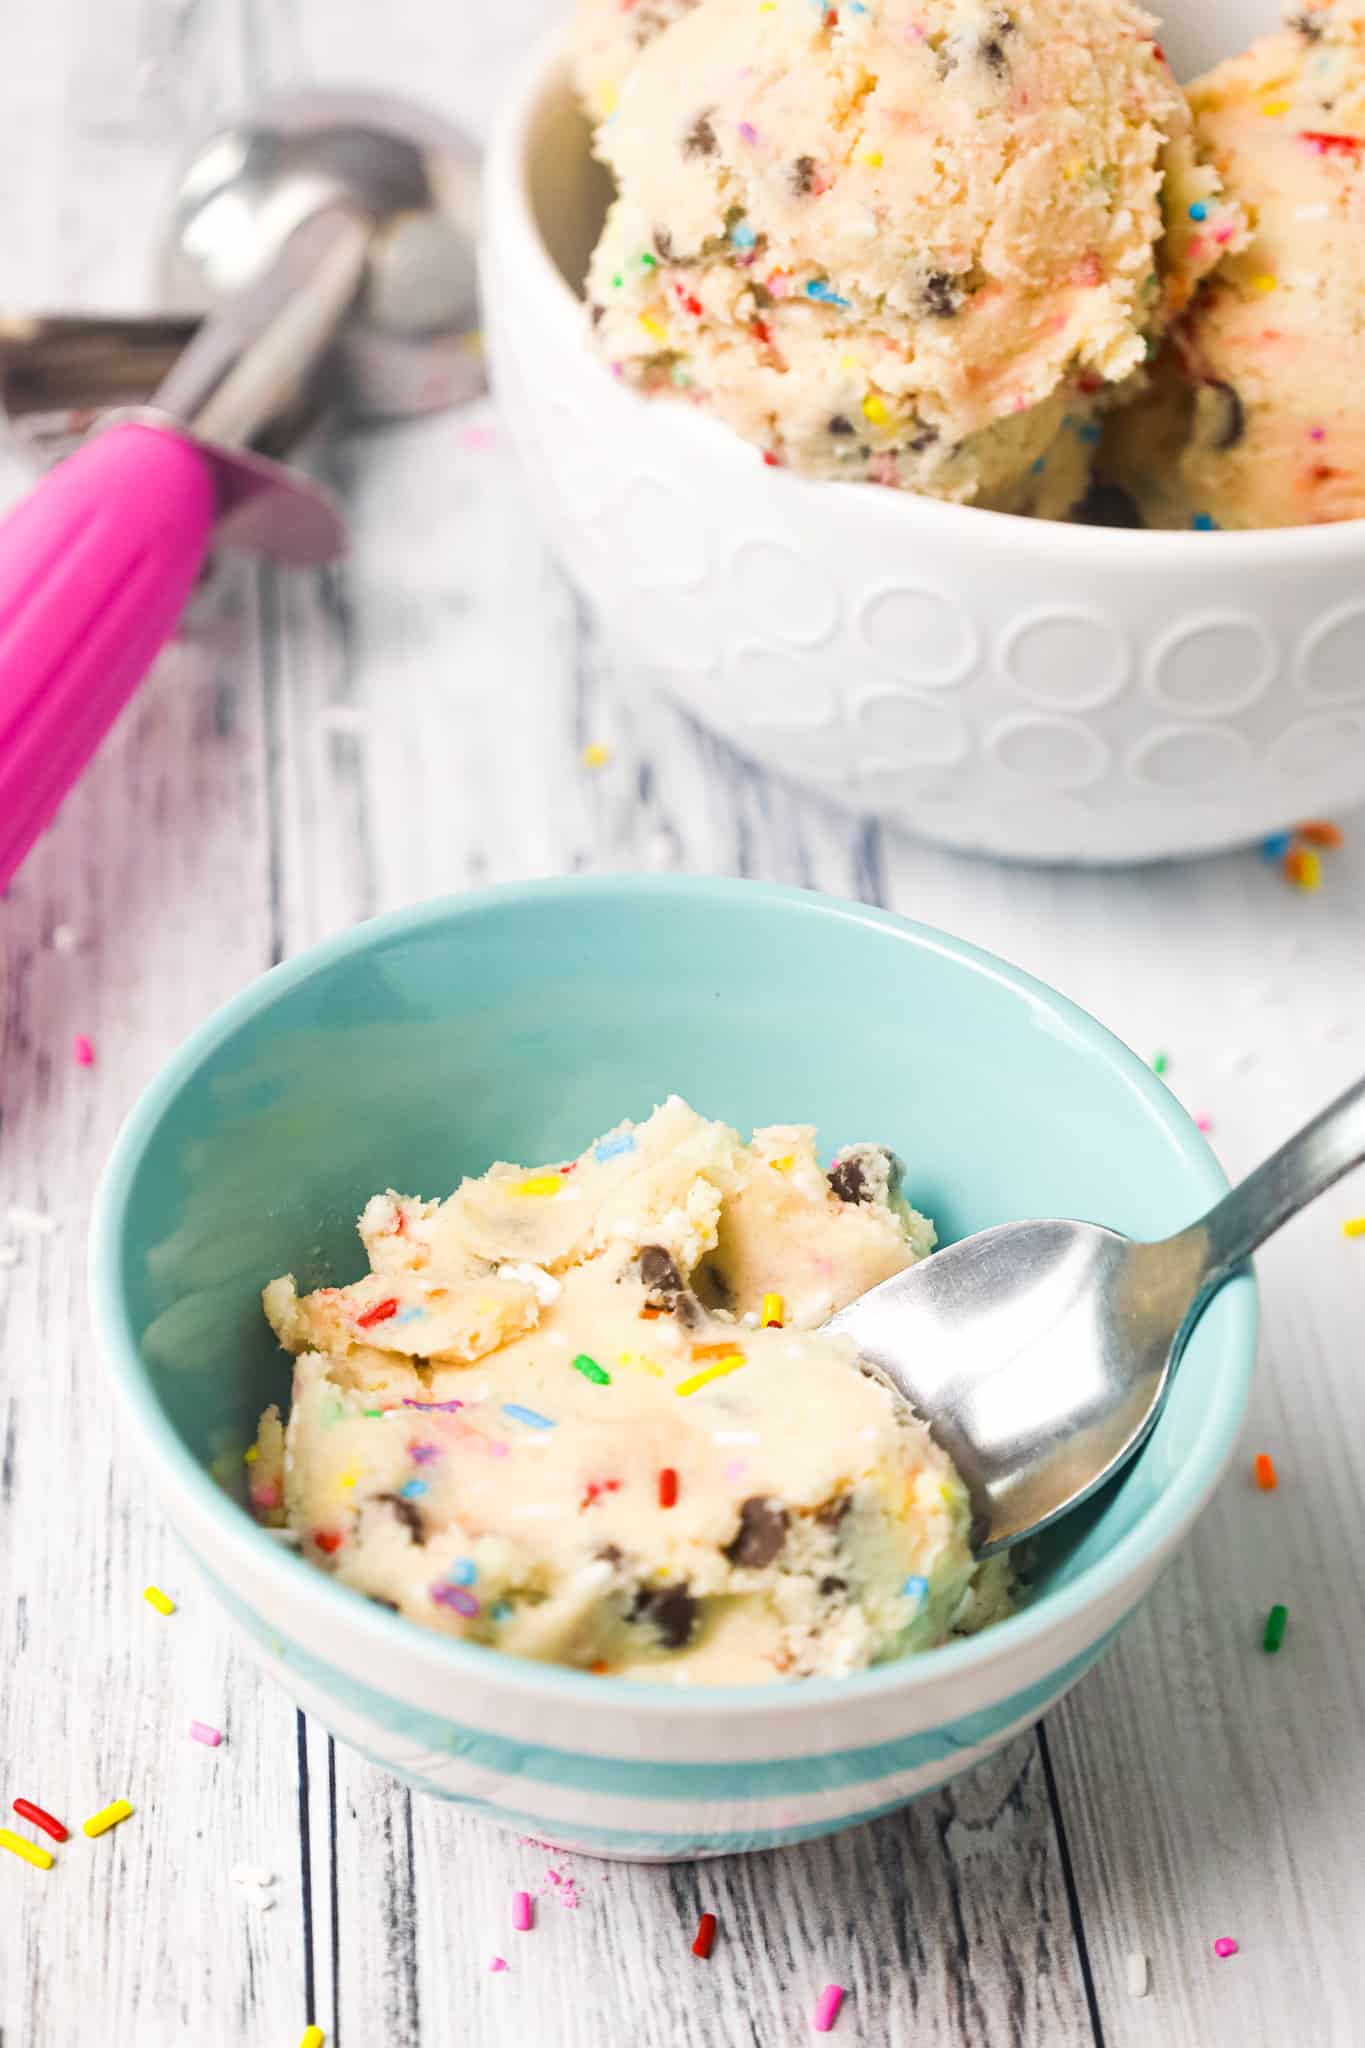 Edible Sugar Cookie Dough is a tasty eggless cookie dough loaded with colourful sprinkles and mini semi sweet chocolate chips.